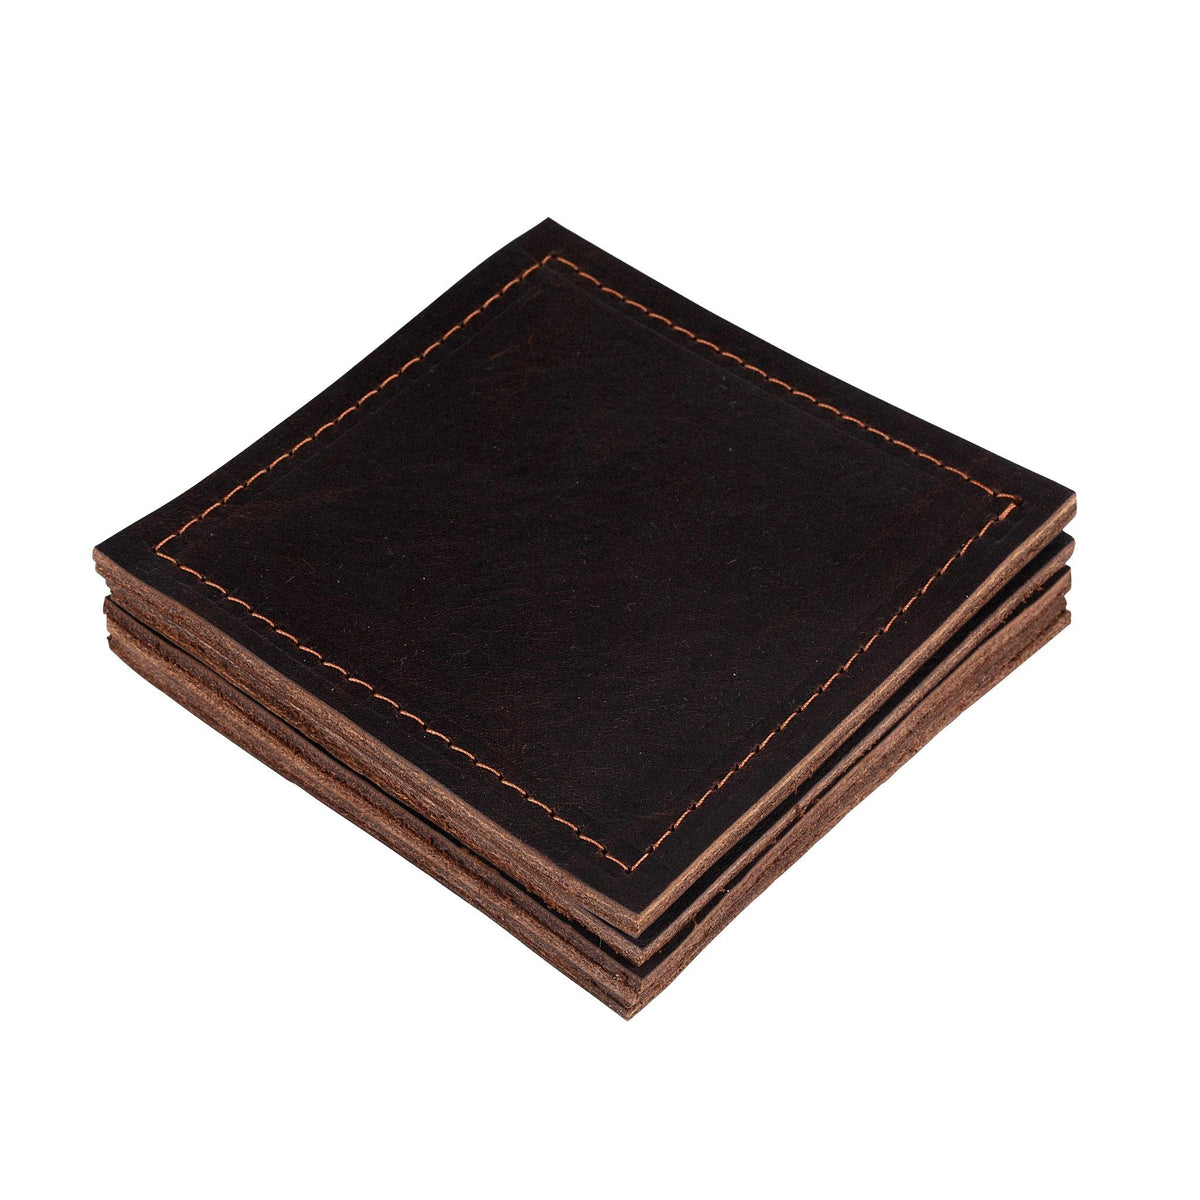 Leather Coaster Set in Chocolate Brown - GLORY HAUS 